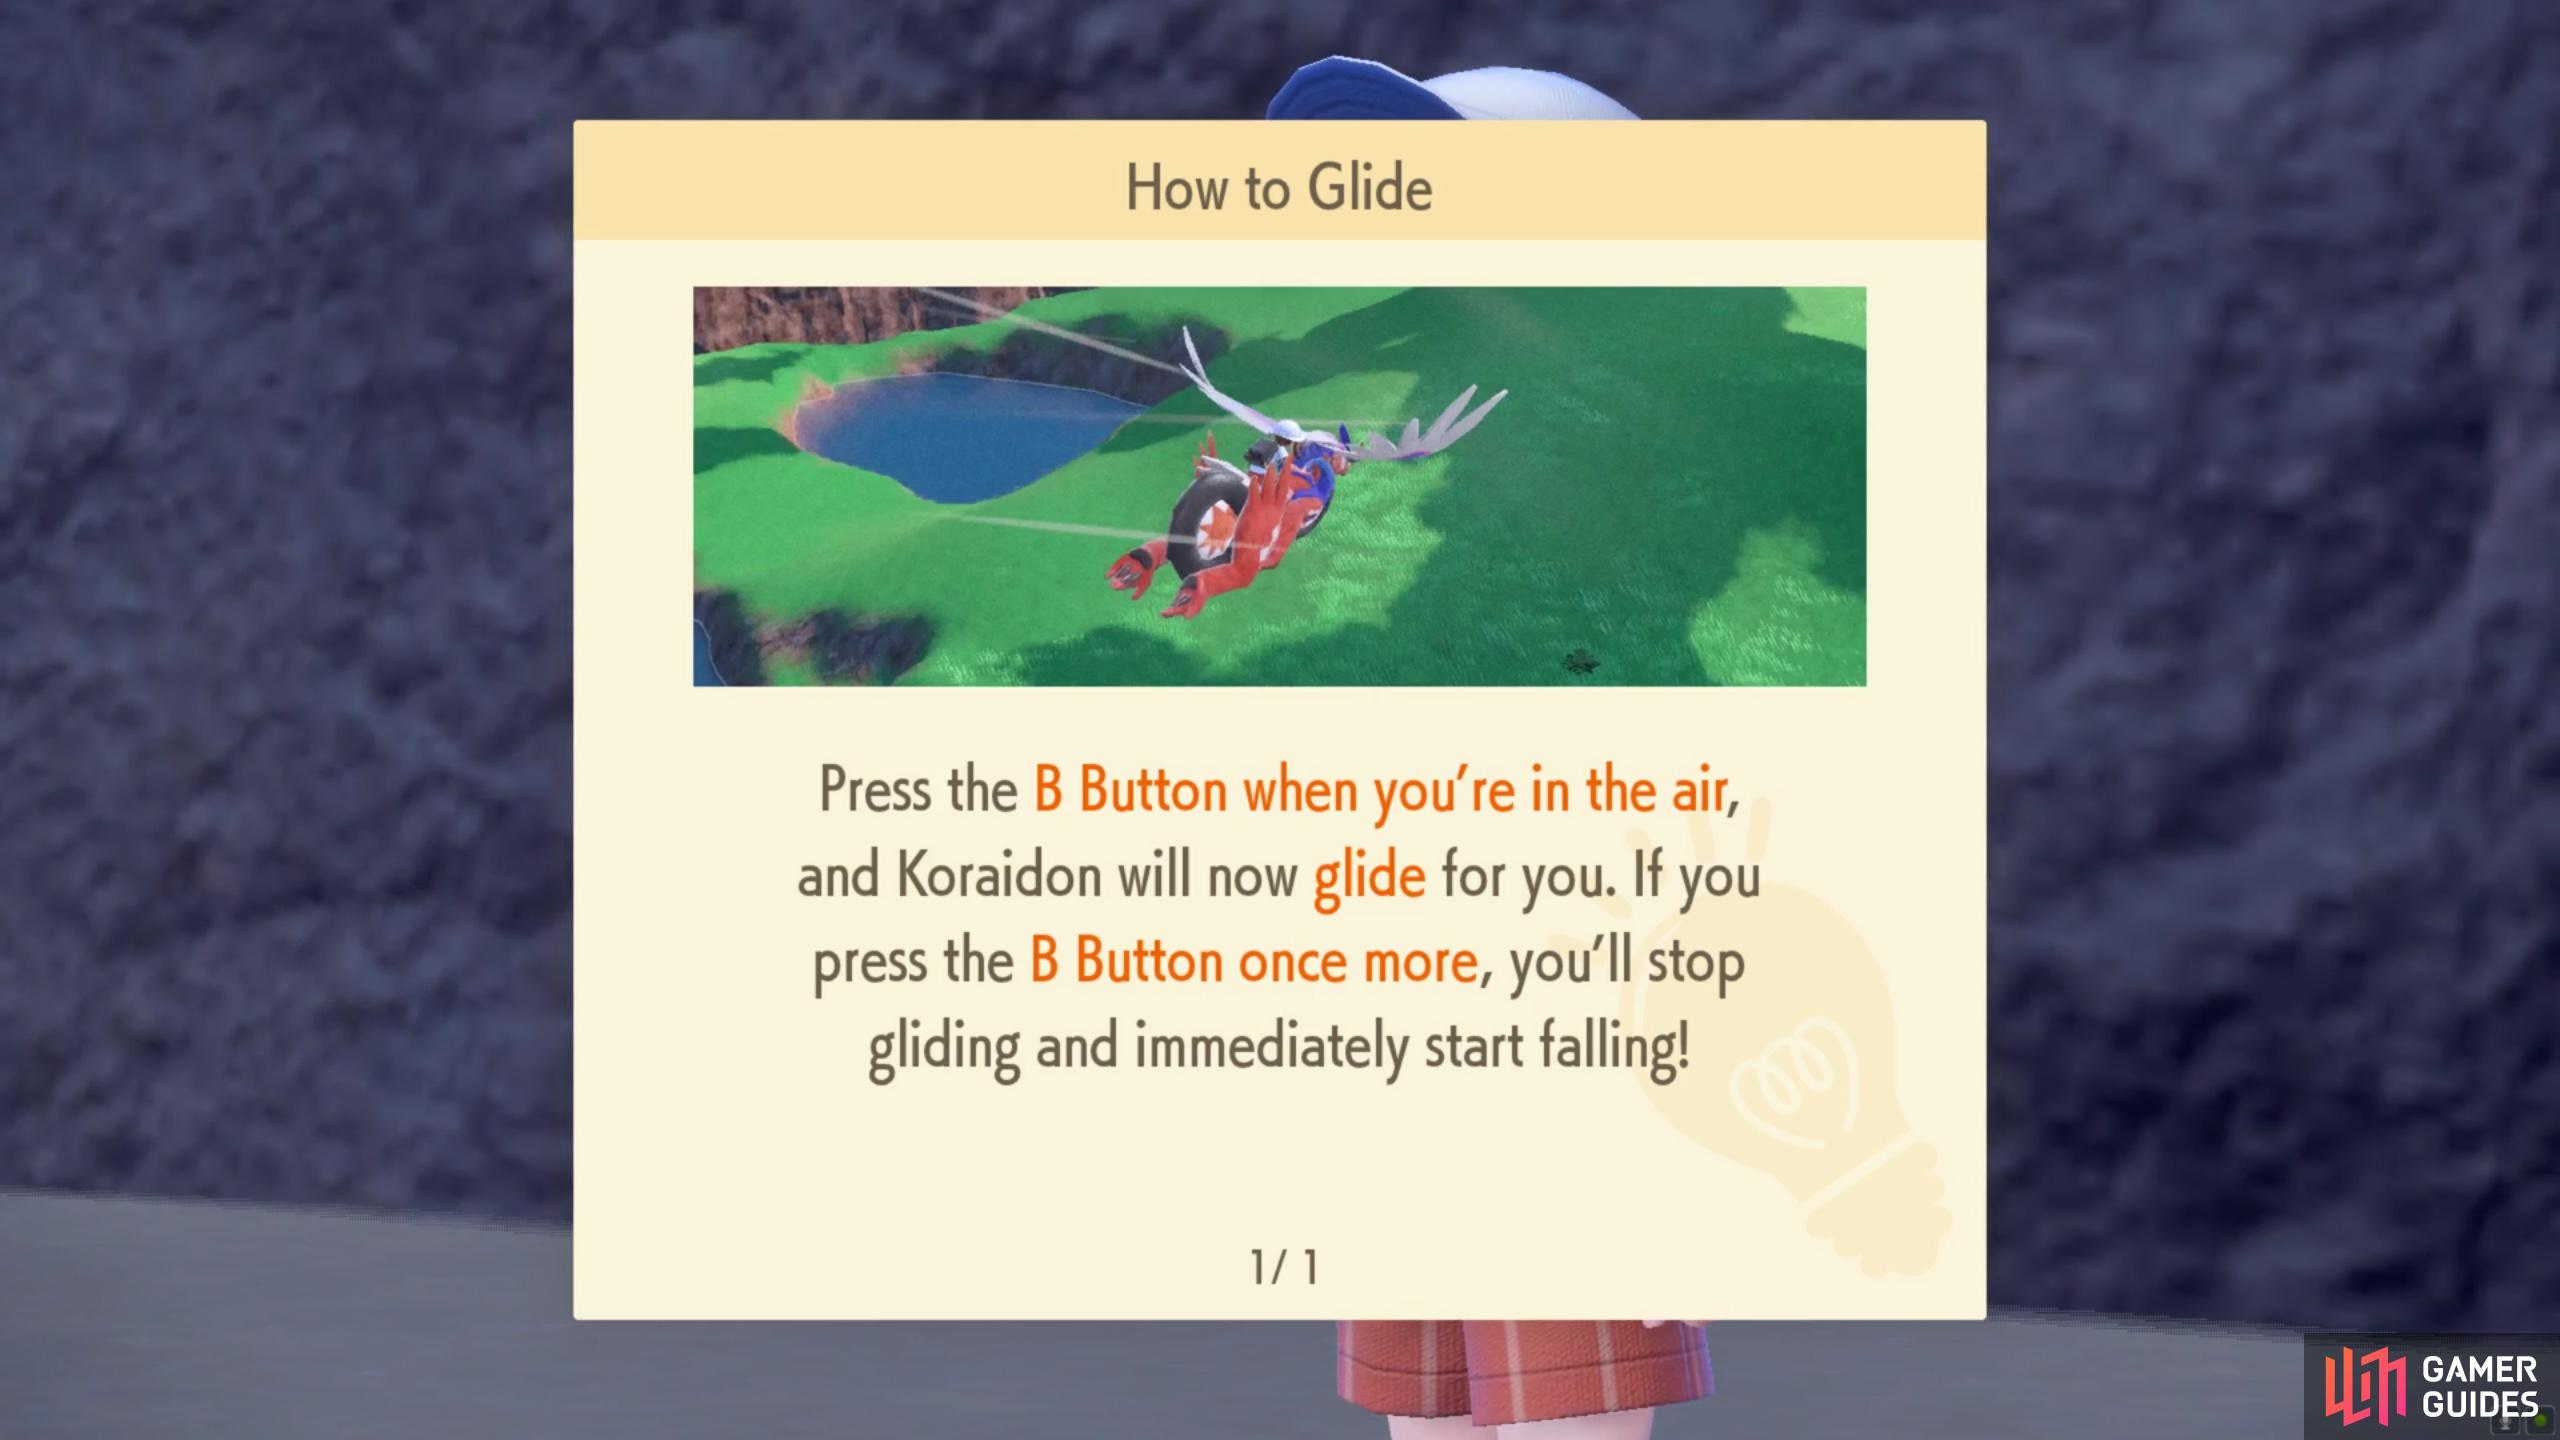 The Professor will teach you how to glide.